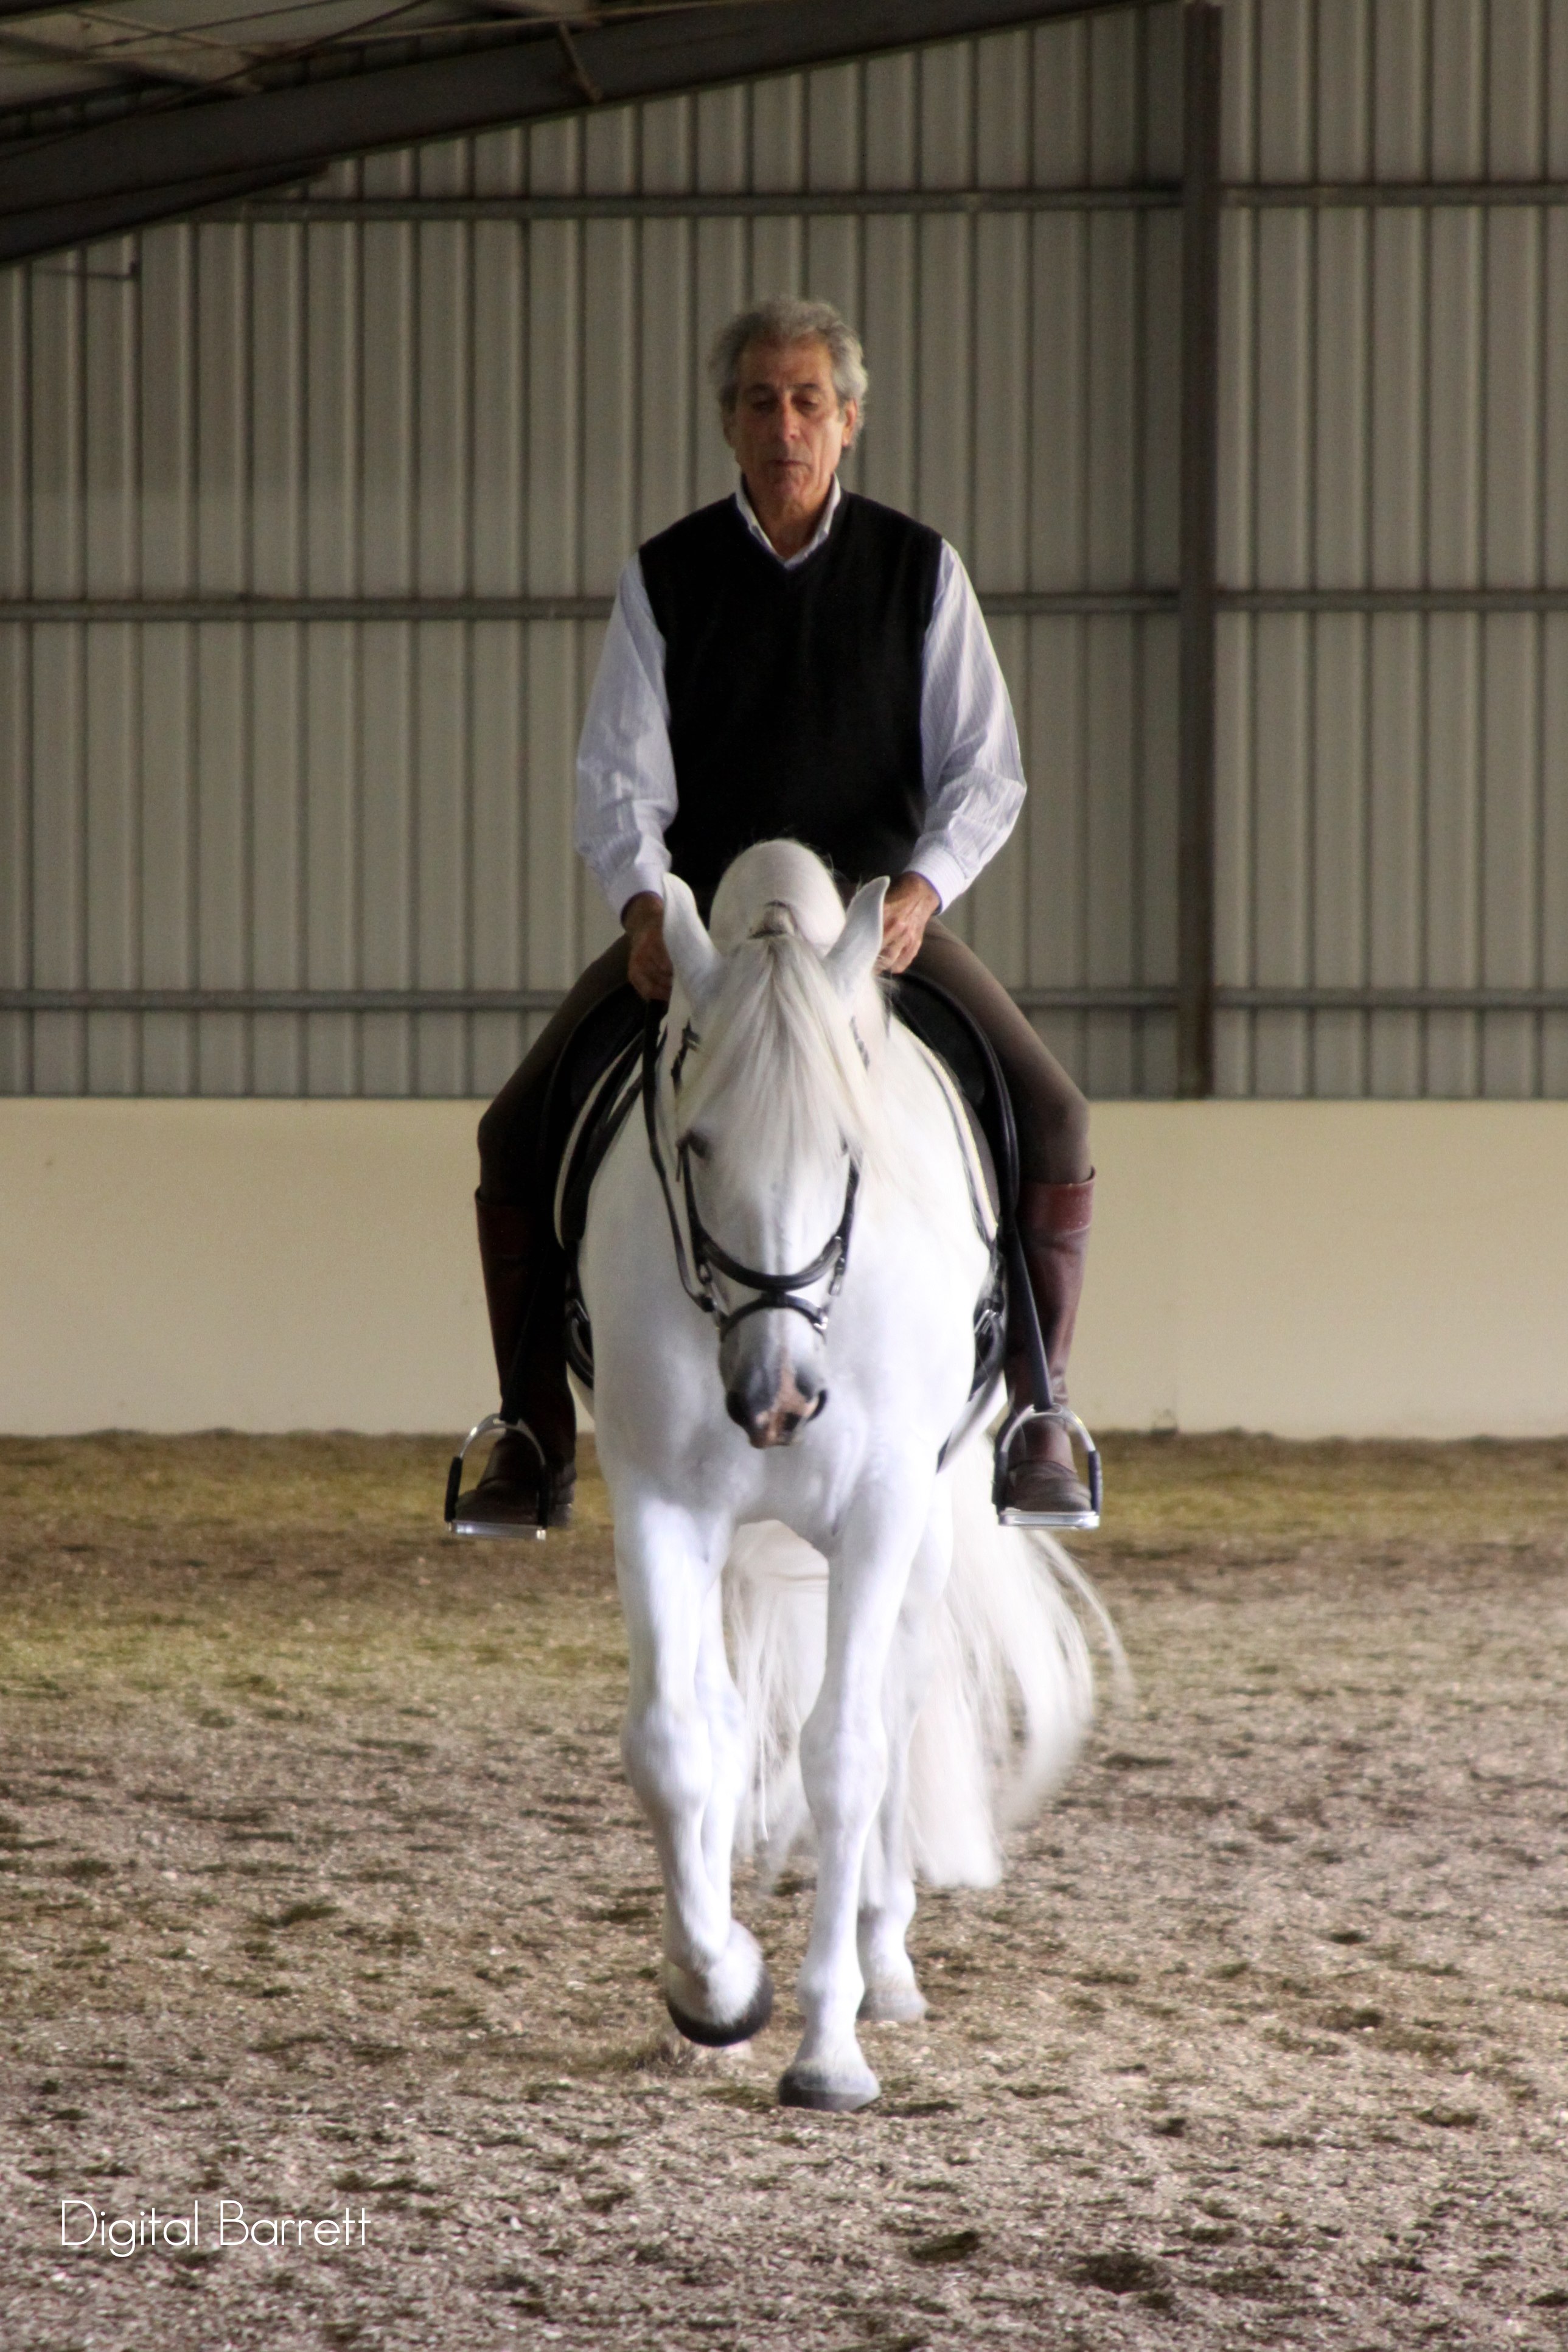 <B>ARTICLES ABOUT LATERAL WORK</B>